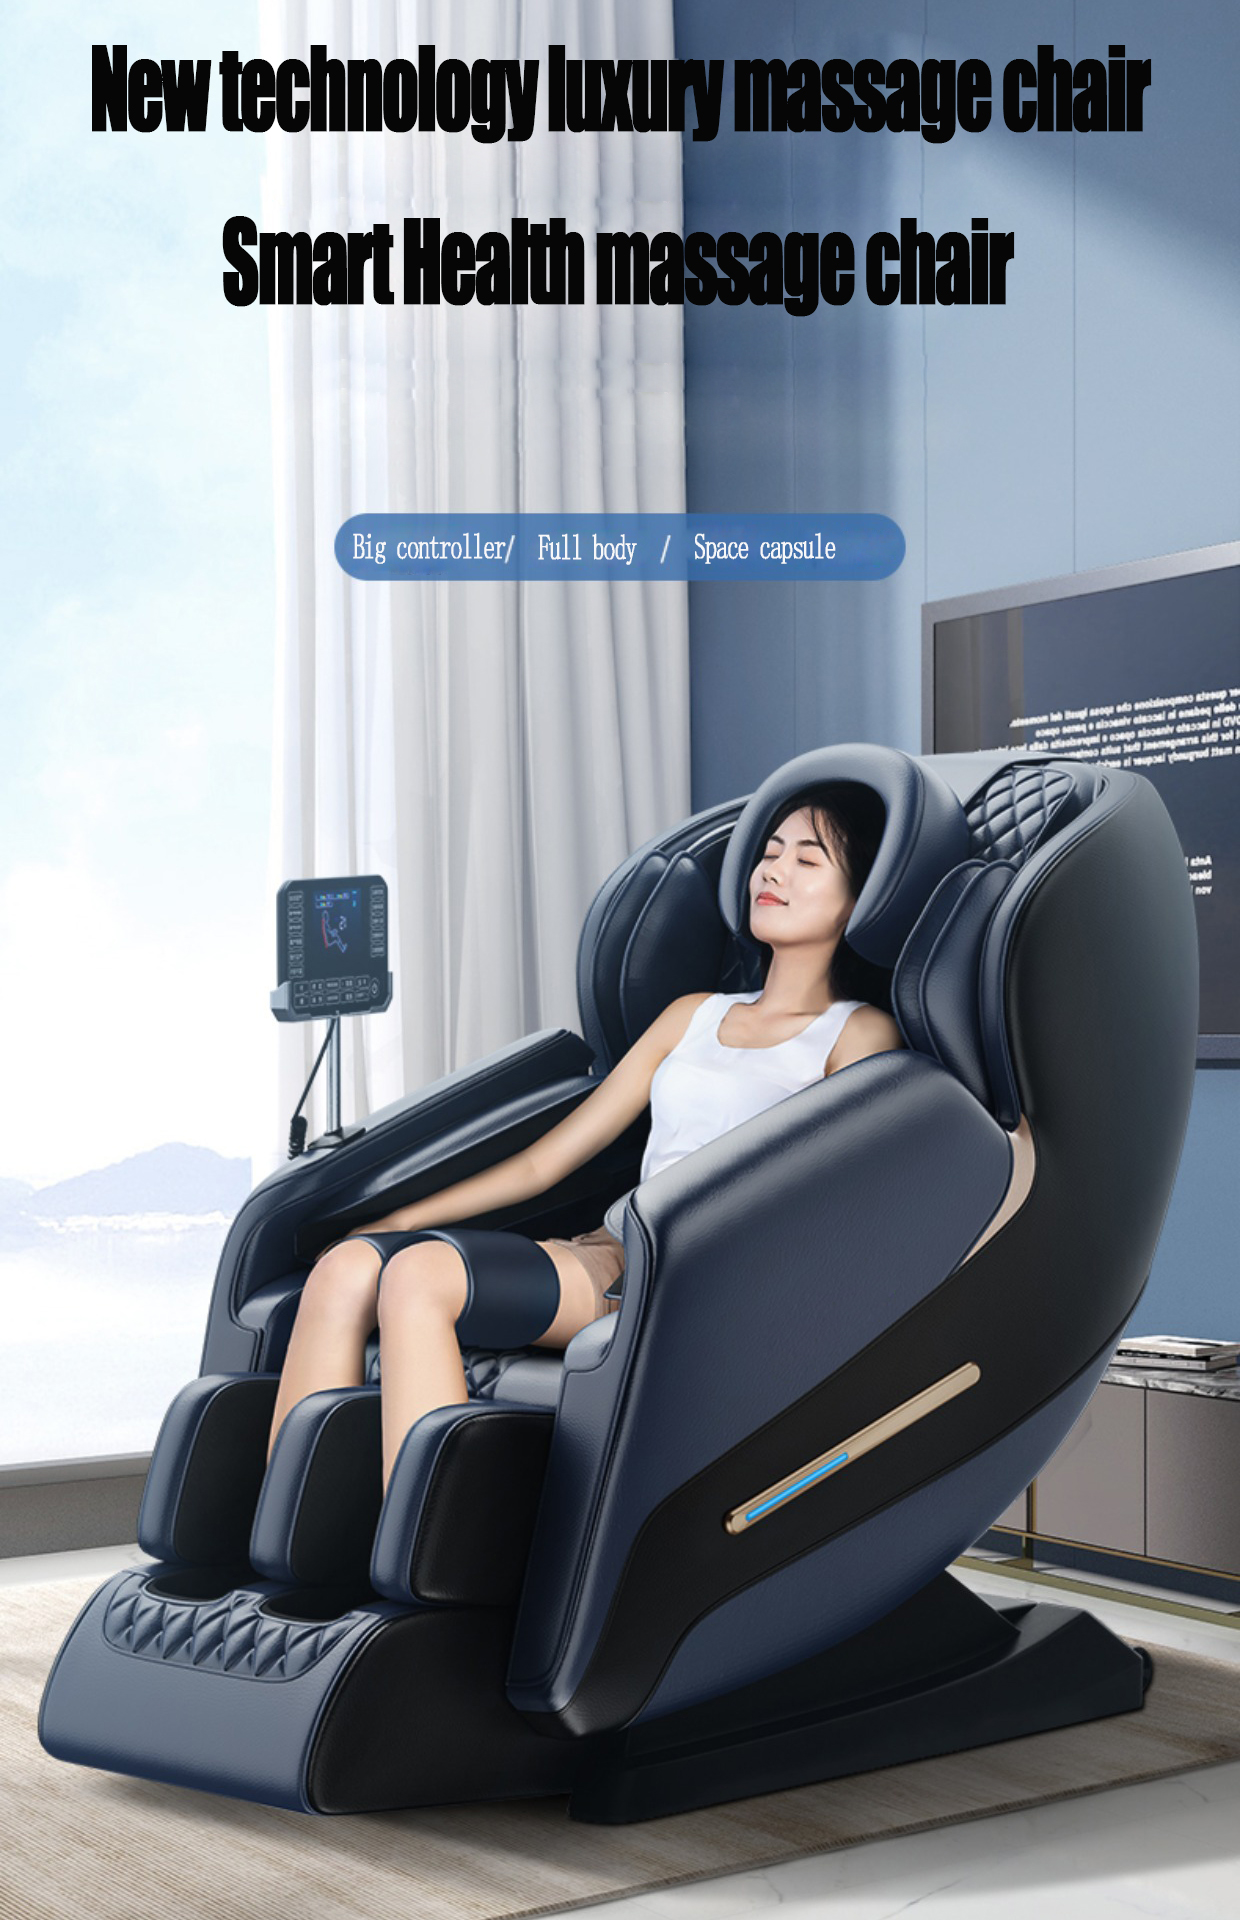 Luxury Massage Chair with free Led TV and Trolley Speaker Pre booking offer only